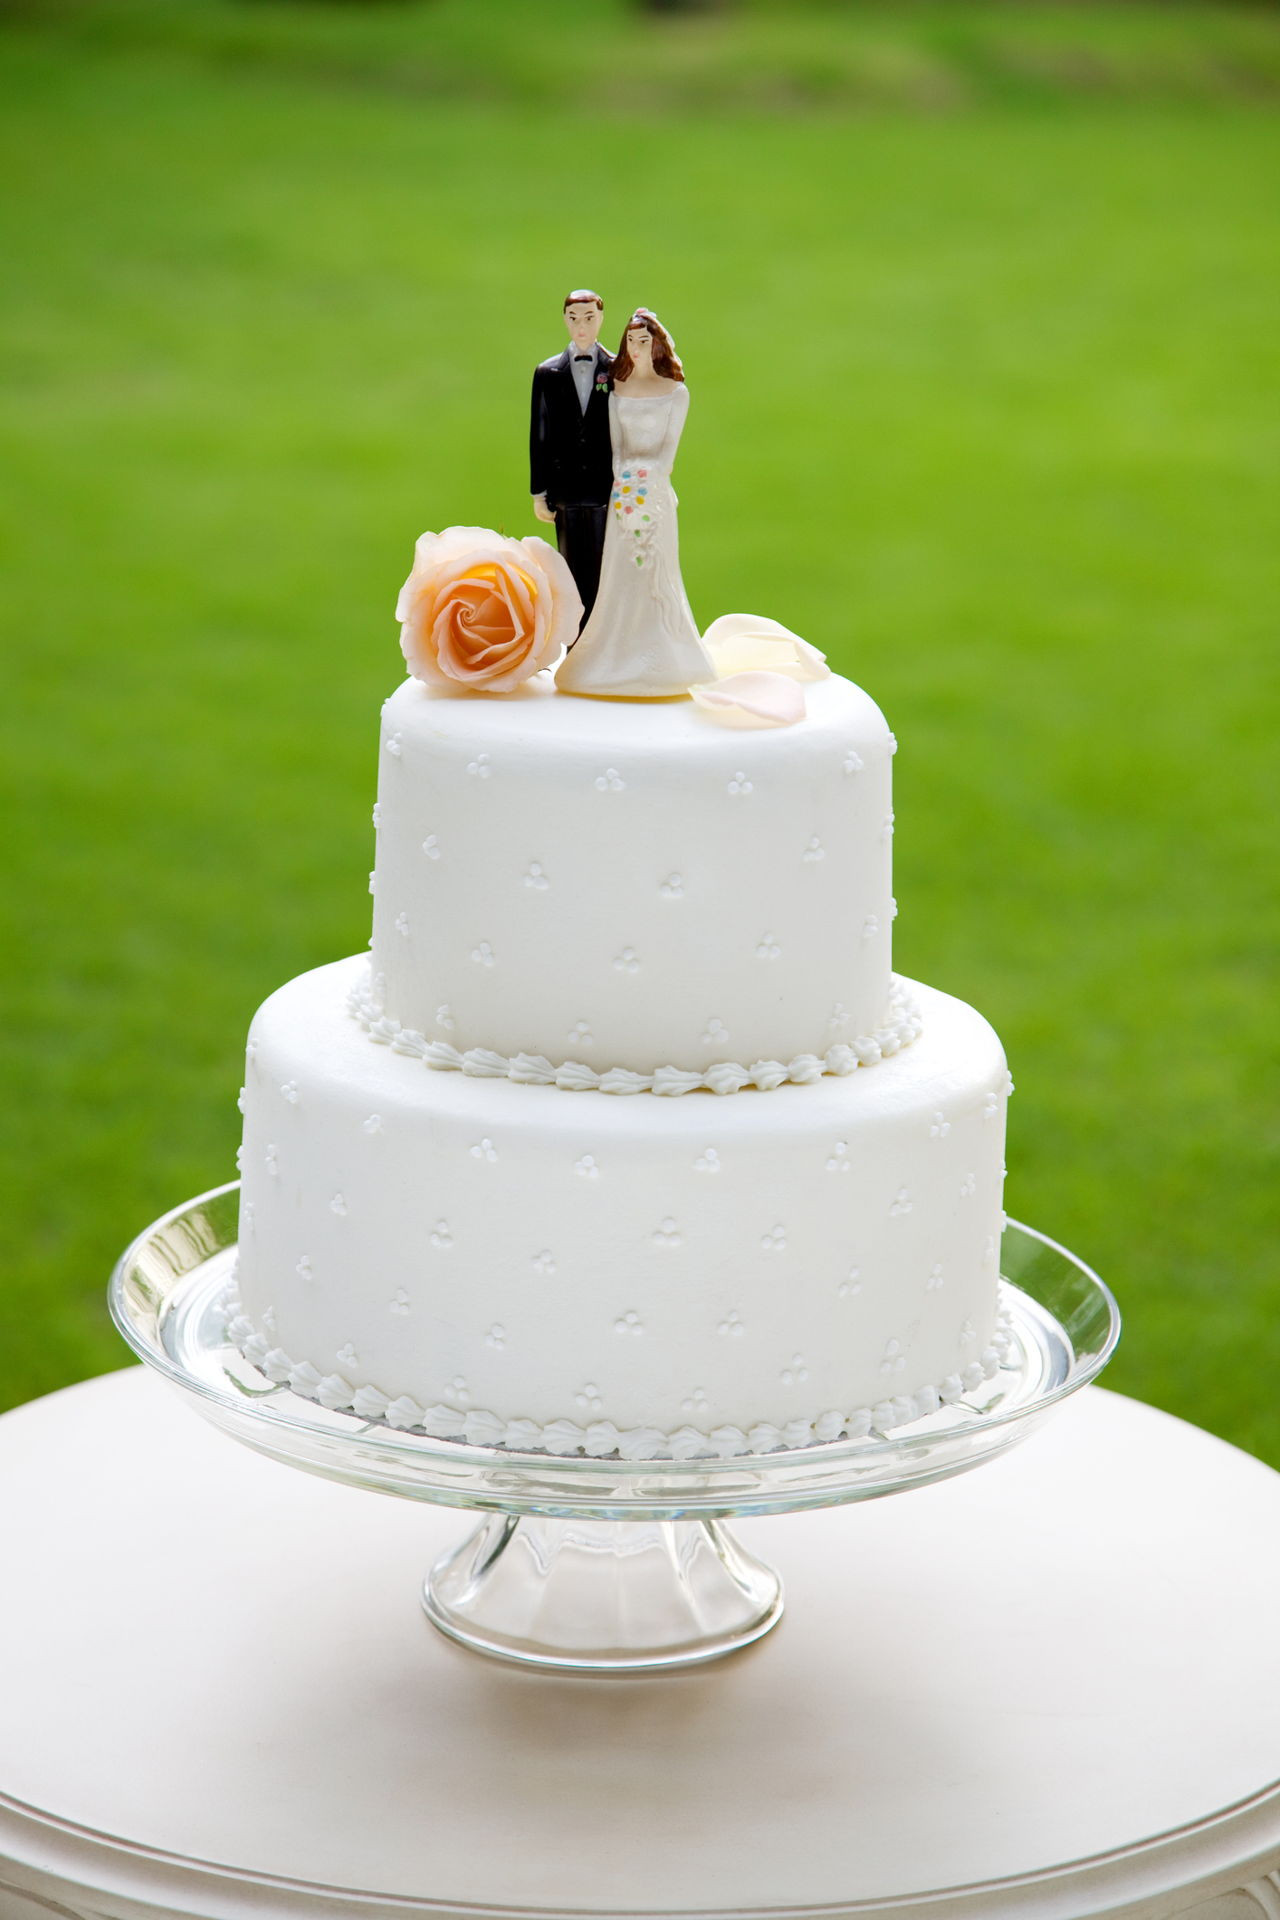 Wedding Cake Recipes For Tiered Cakes
 Bake Your Own Wedding Cake From Scratch With These Great